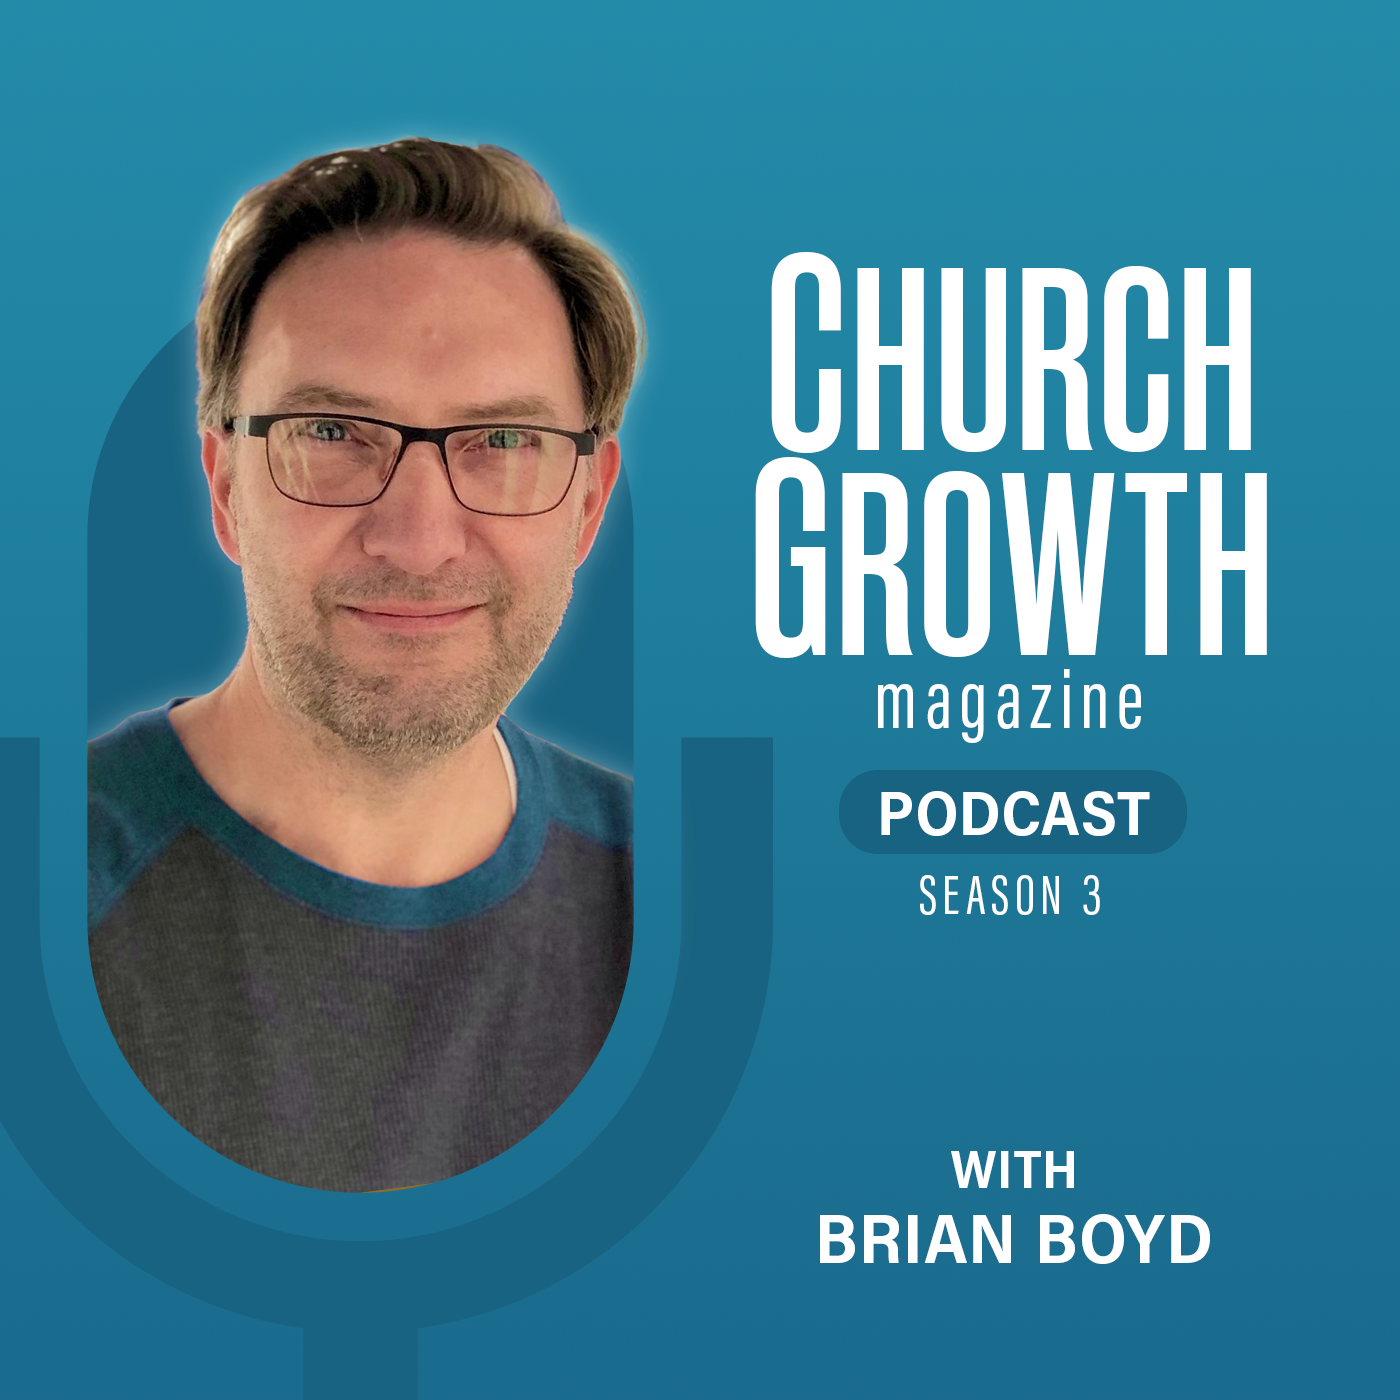 Special Episode: Coronavirus: 5 Immediate Actions Your Church Should Take - with Don Corder